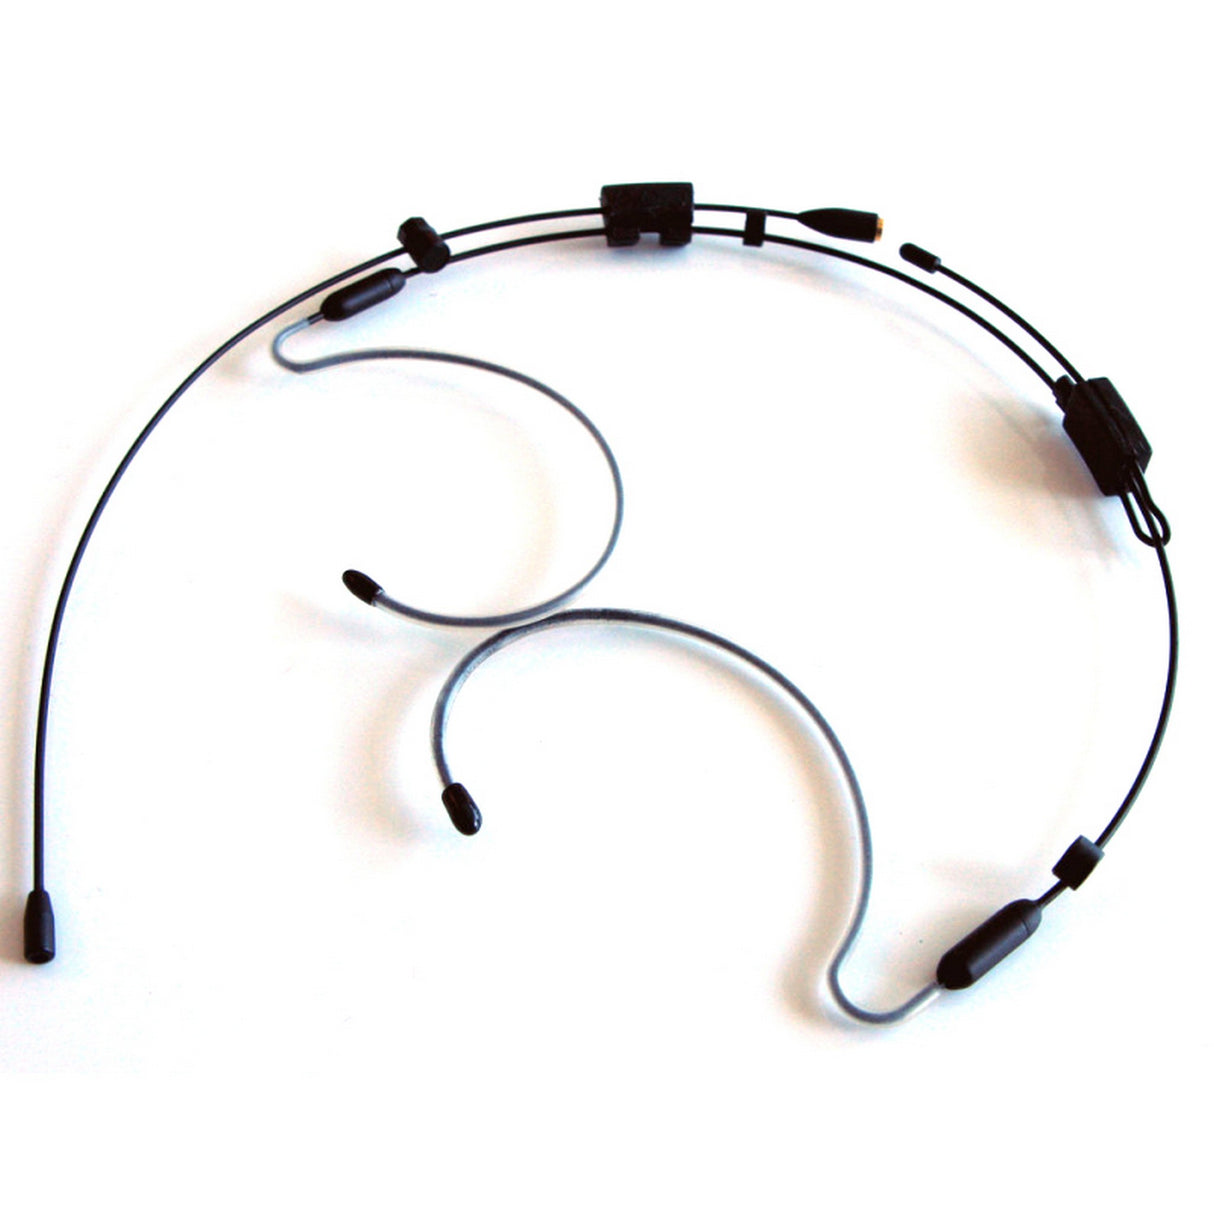 Provider Series PSM1 Omnidirectional Dual-Ear Headworn Microphone with TA3F for EV 3000, Black